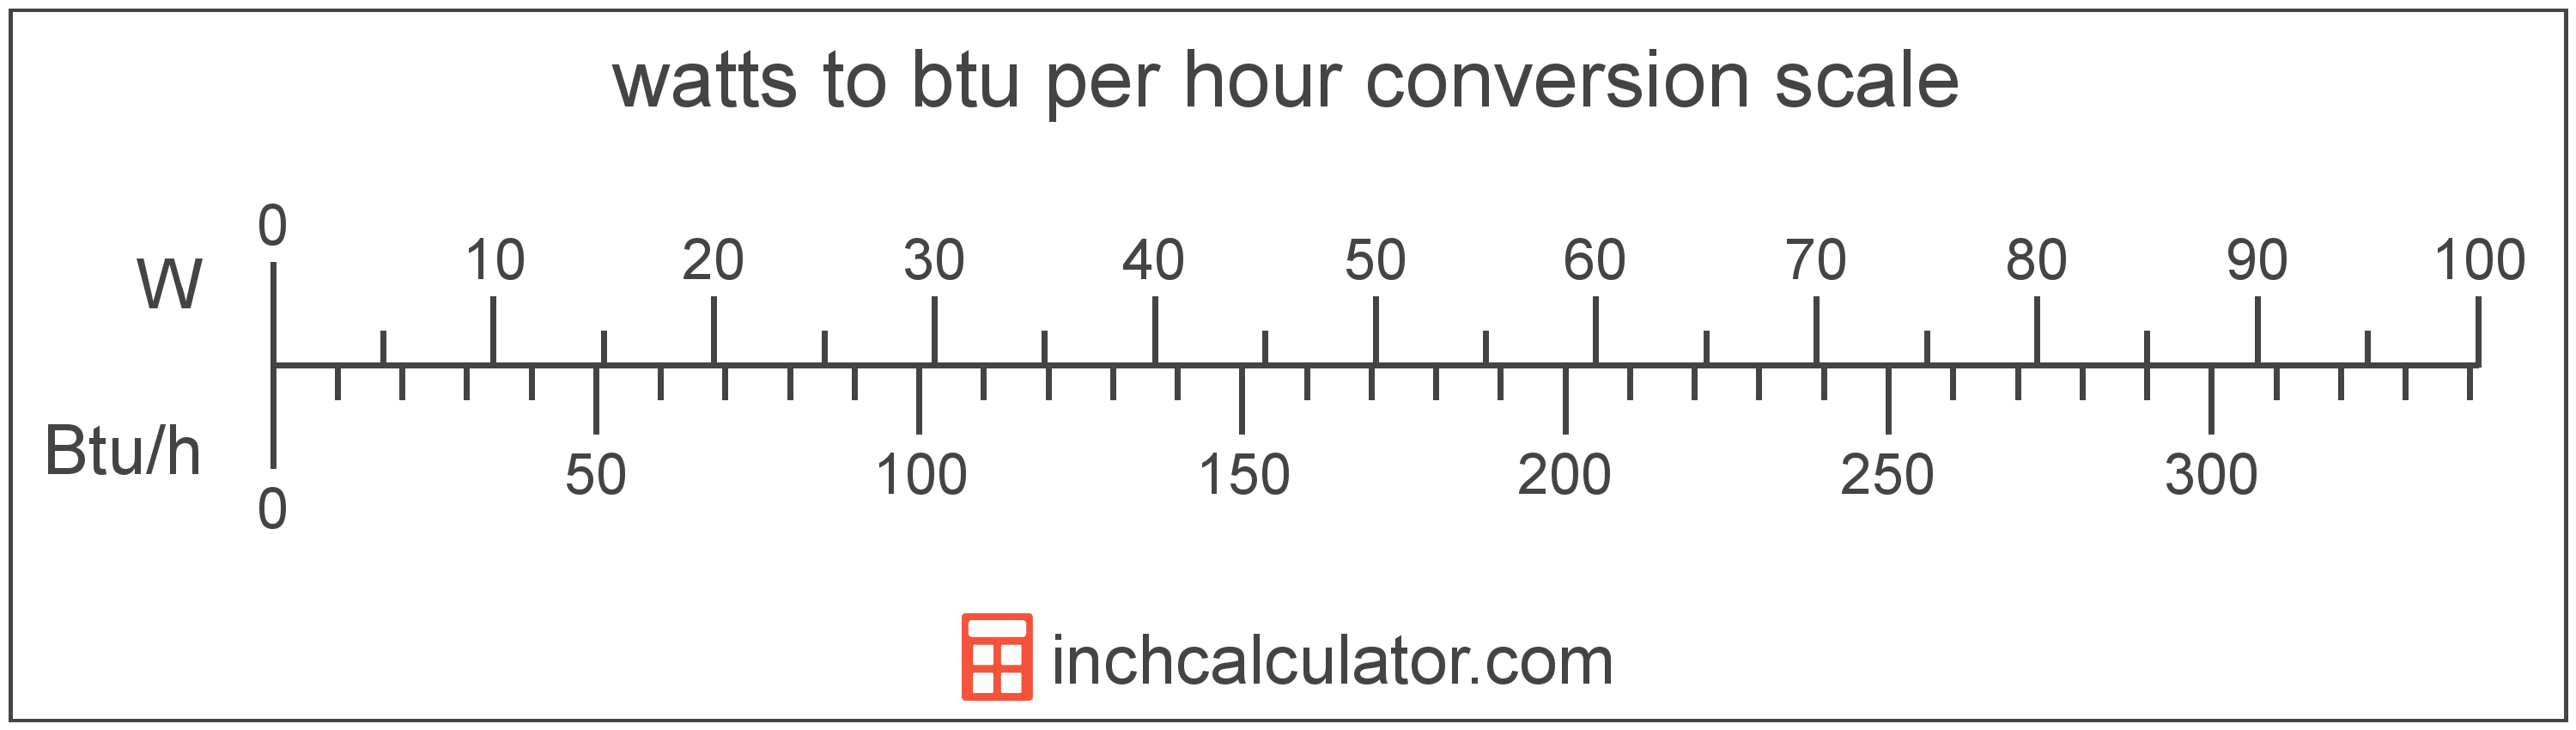 conversion scale showing btu per hour and equivalent watts power values